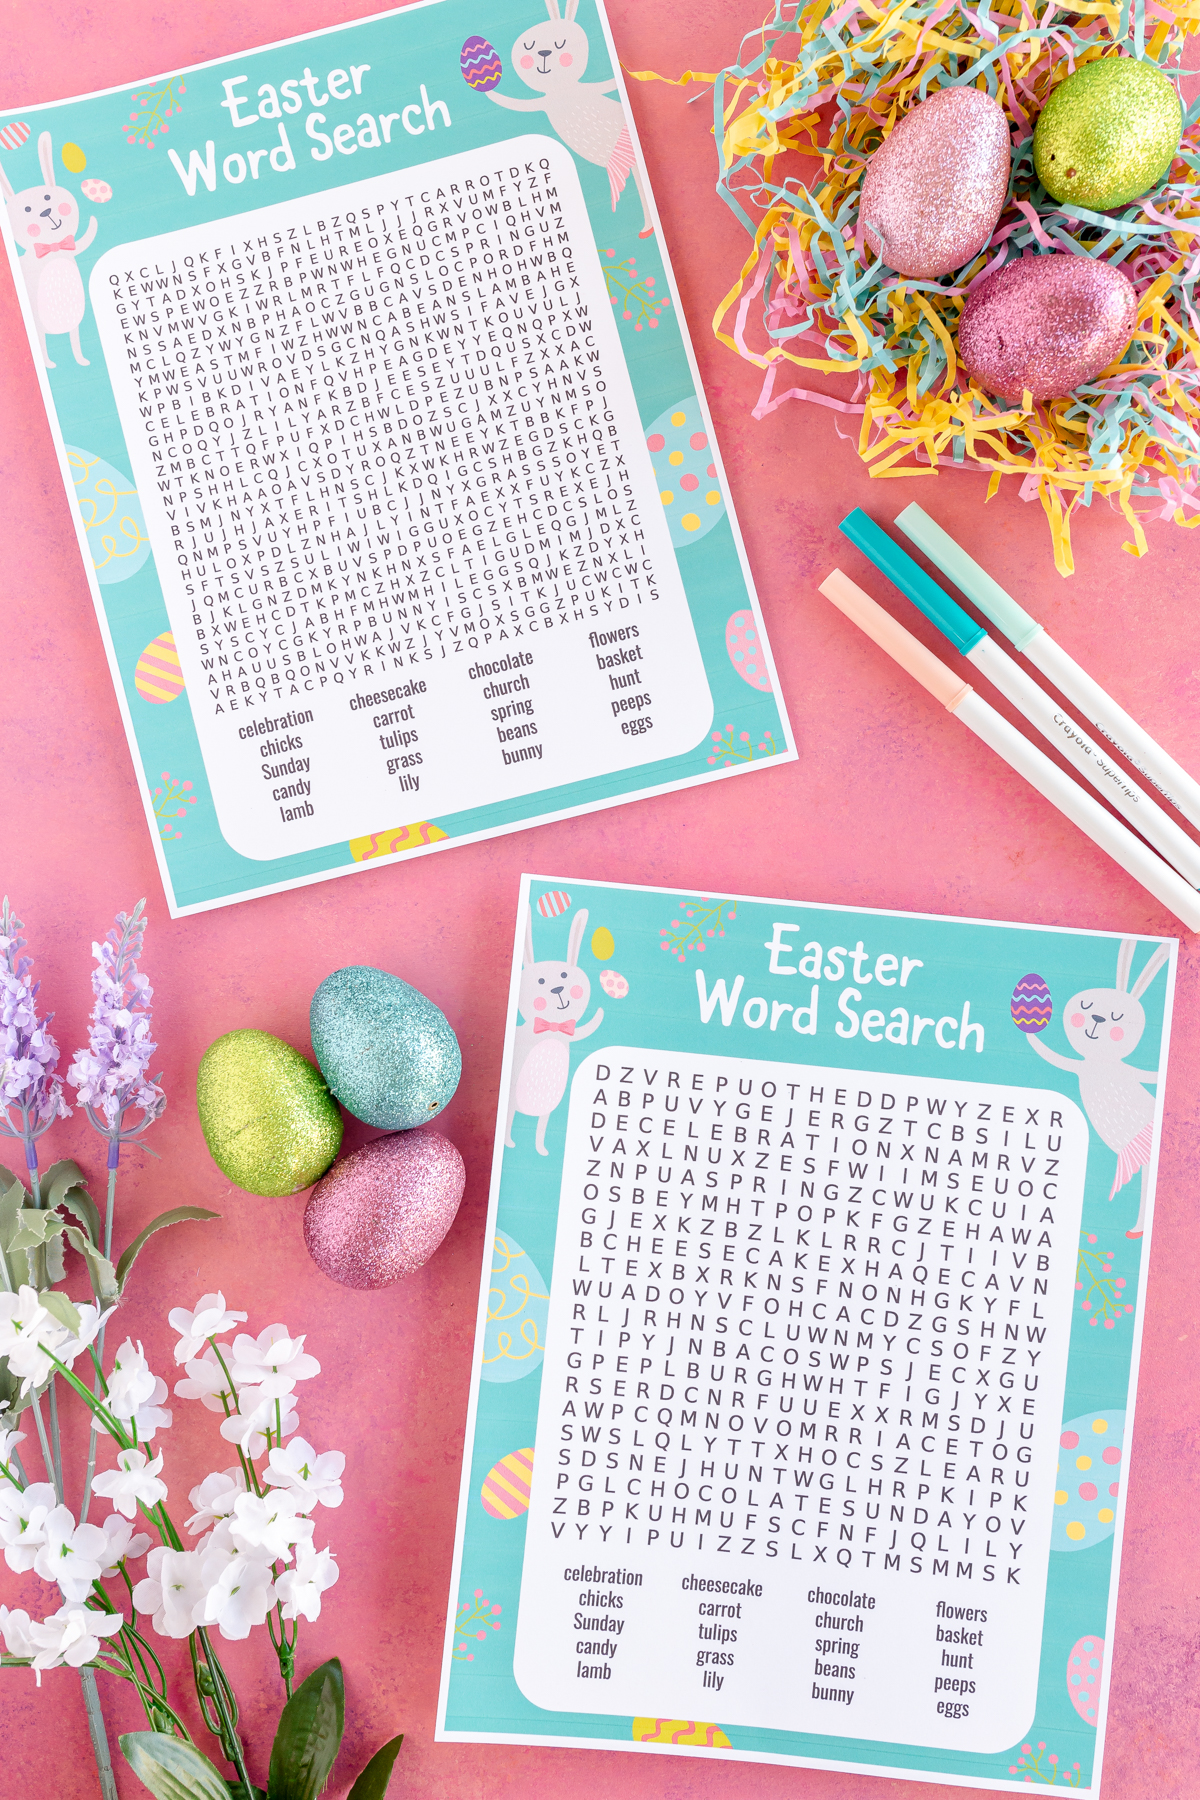 picture with two different Easter word search options